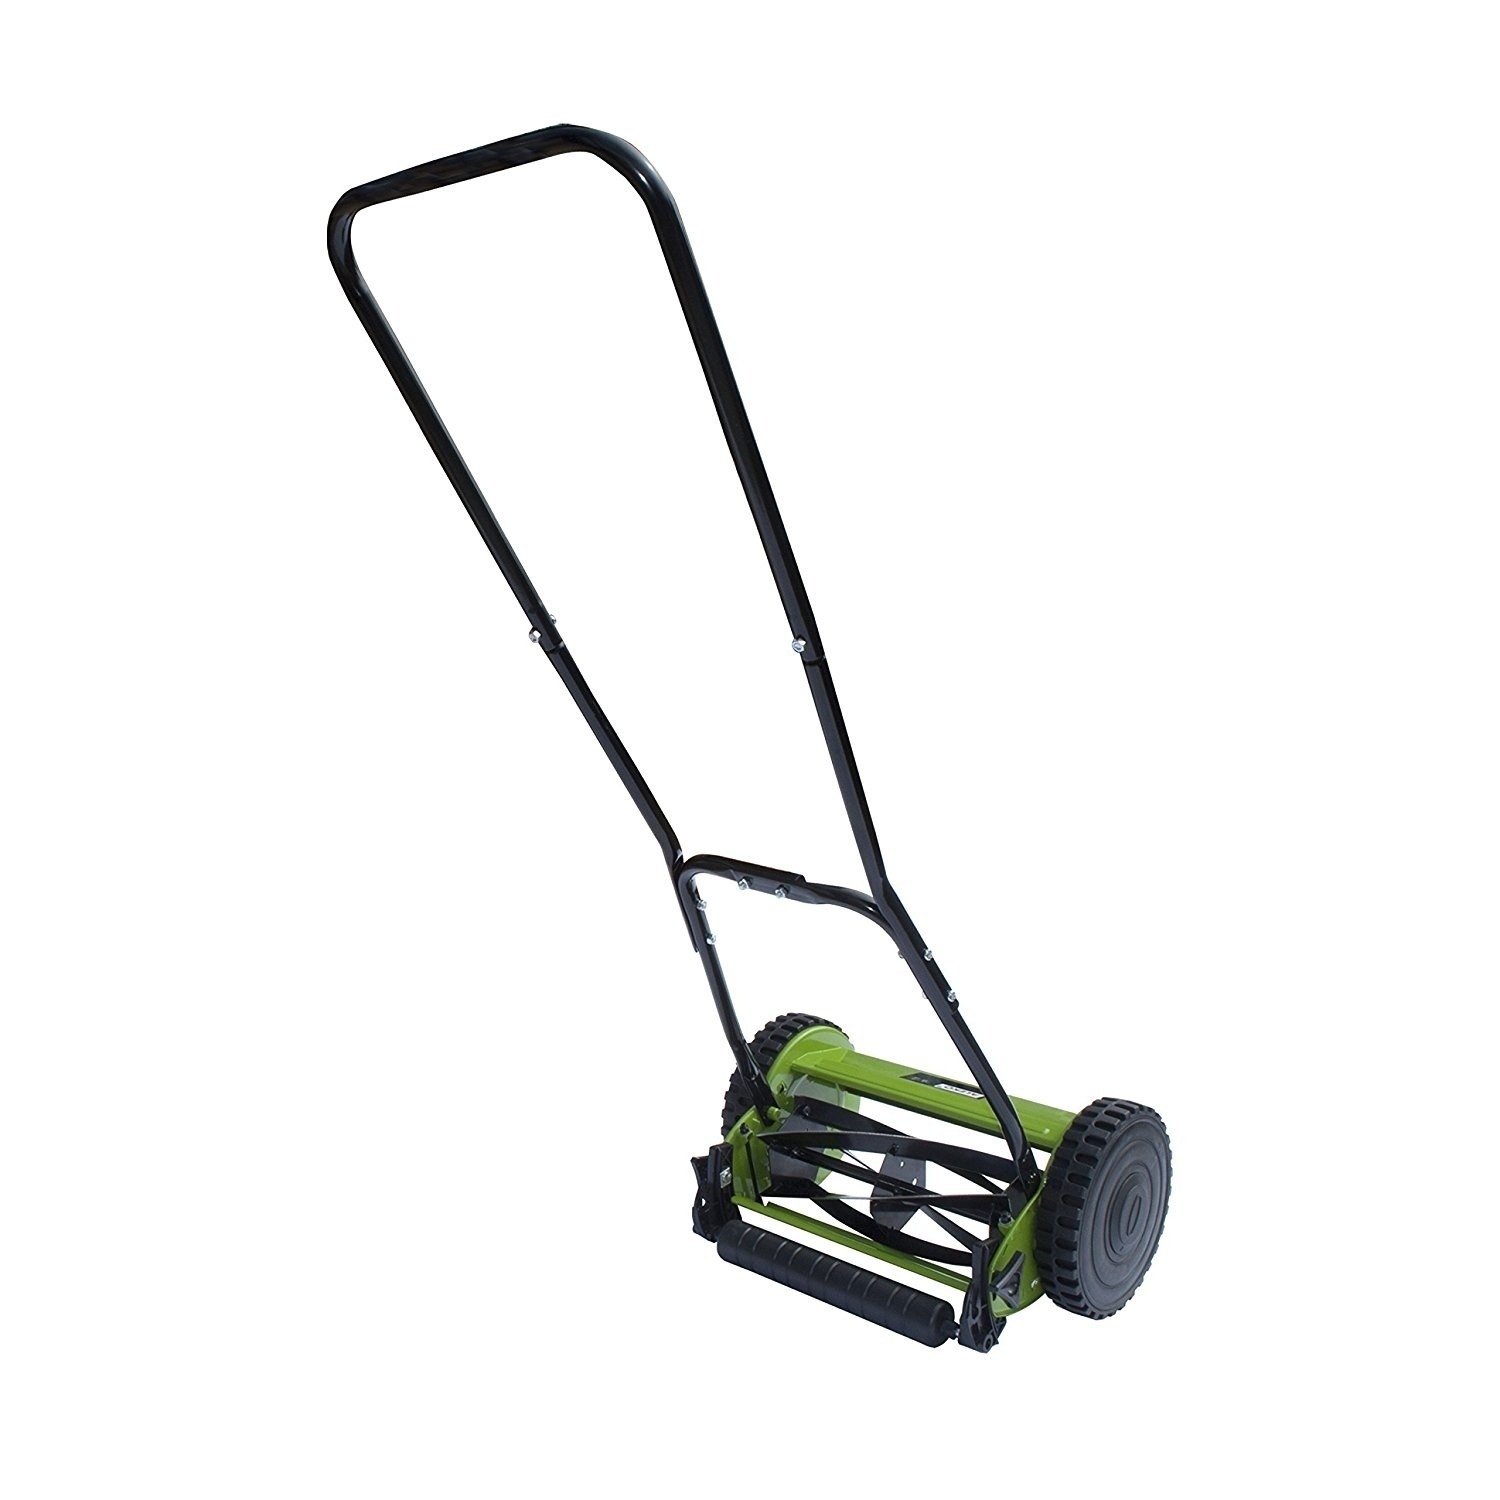 ALEKO Hand Push Lawn Mower with Adjustable Cutting Height - 5-Blade - 12-Inch - image 1 of 5